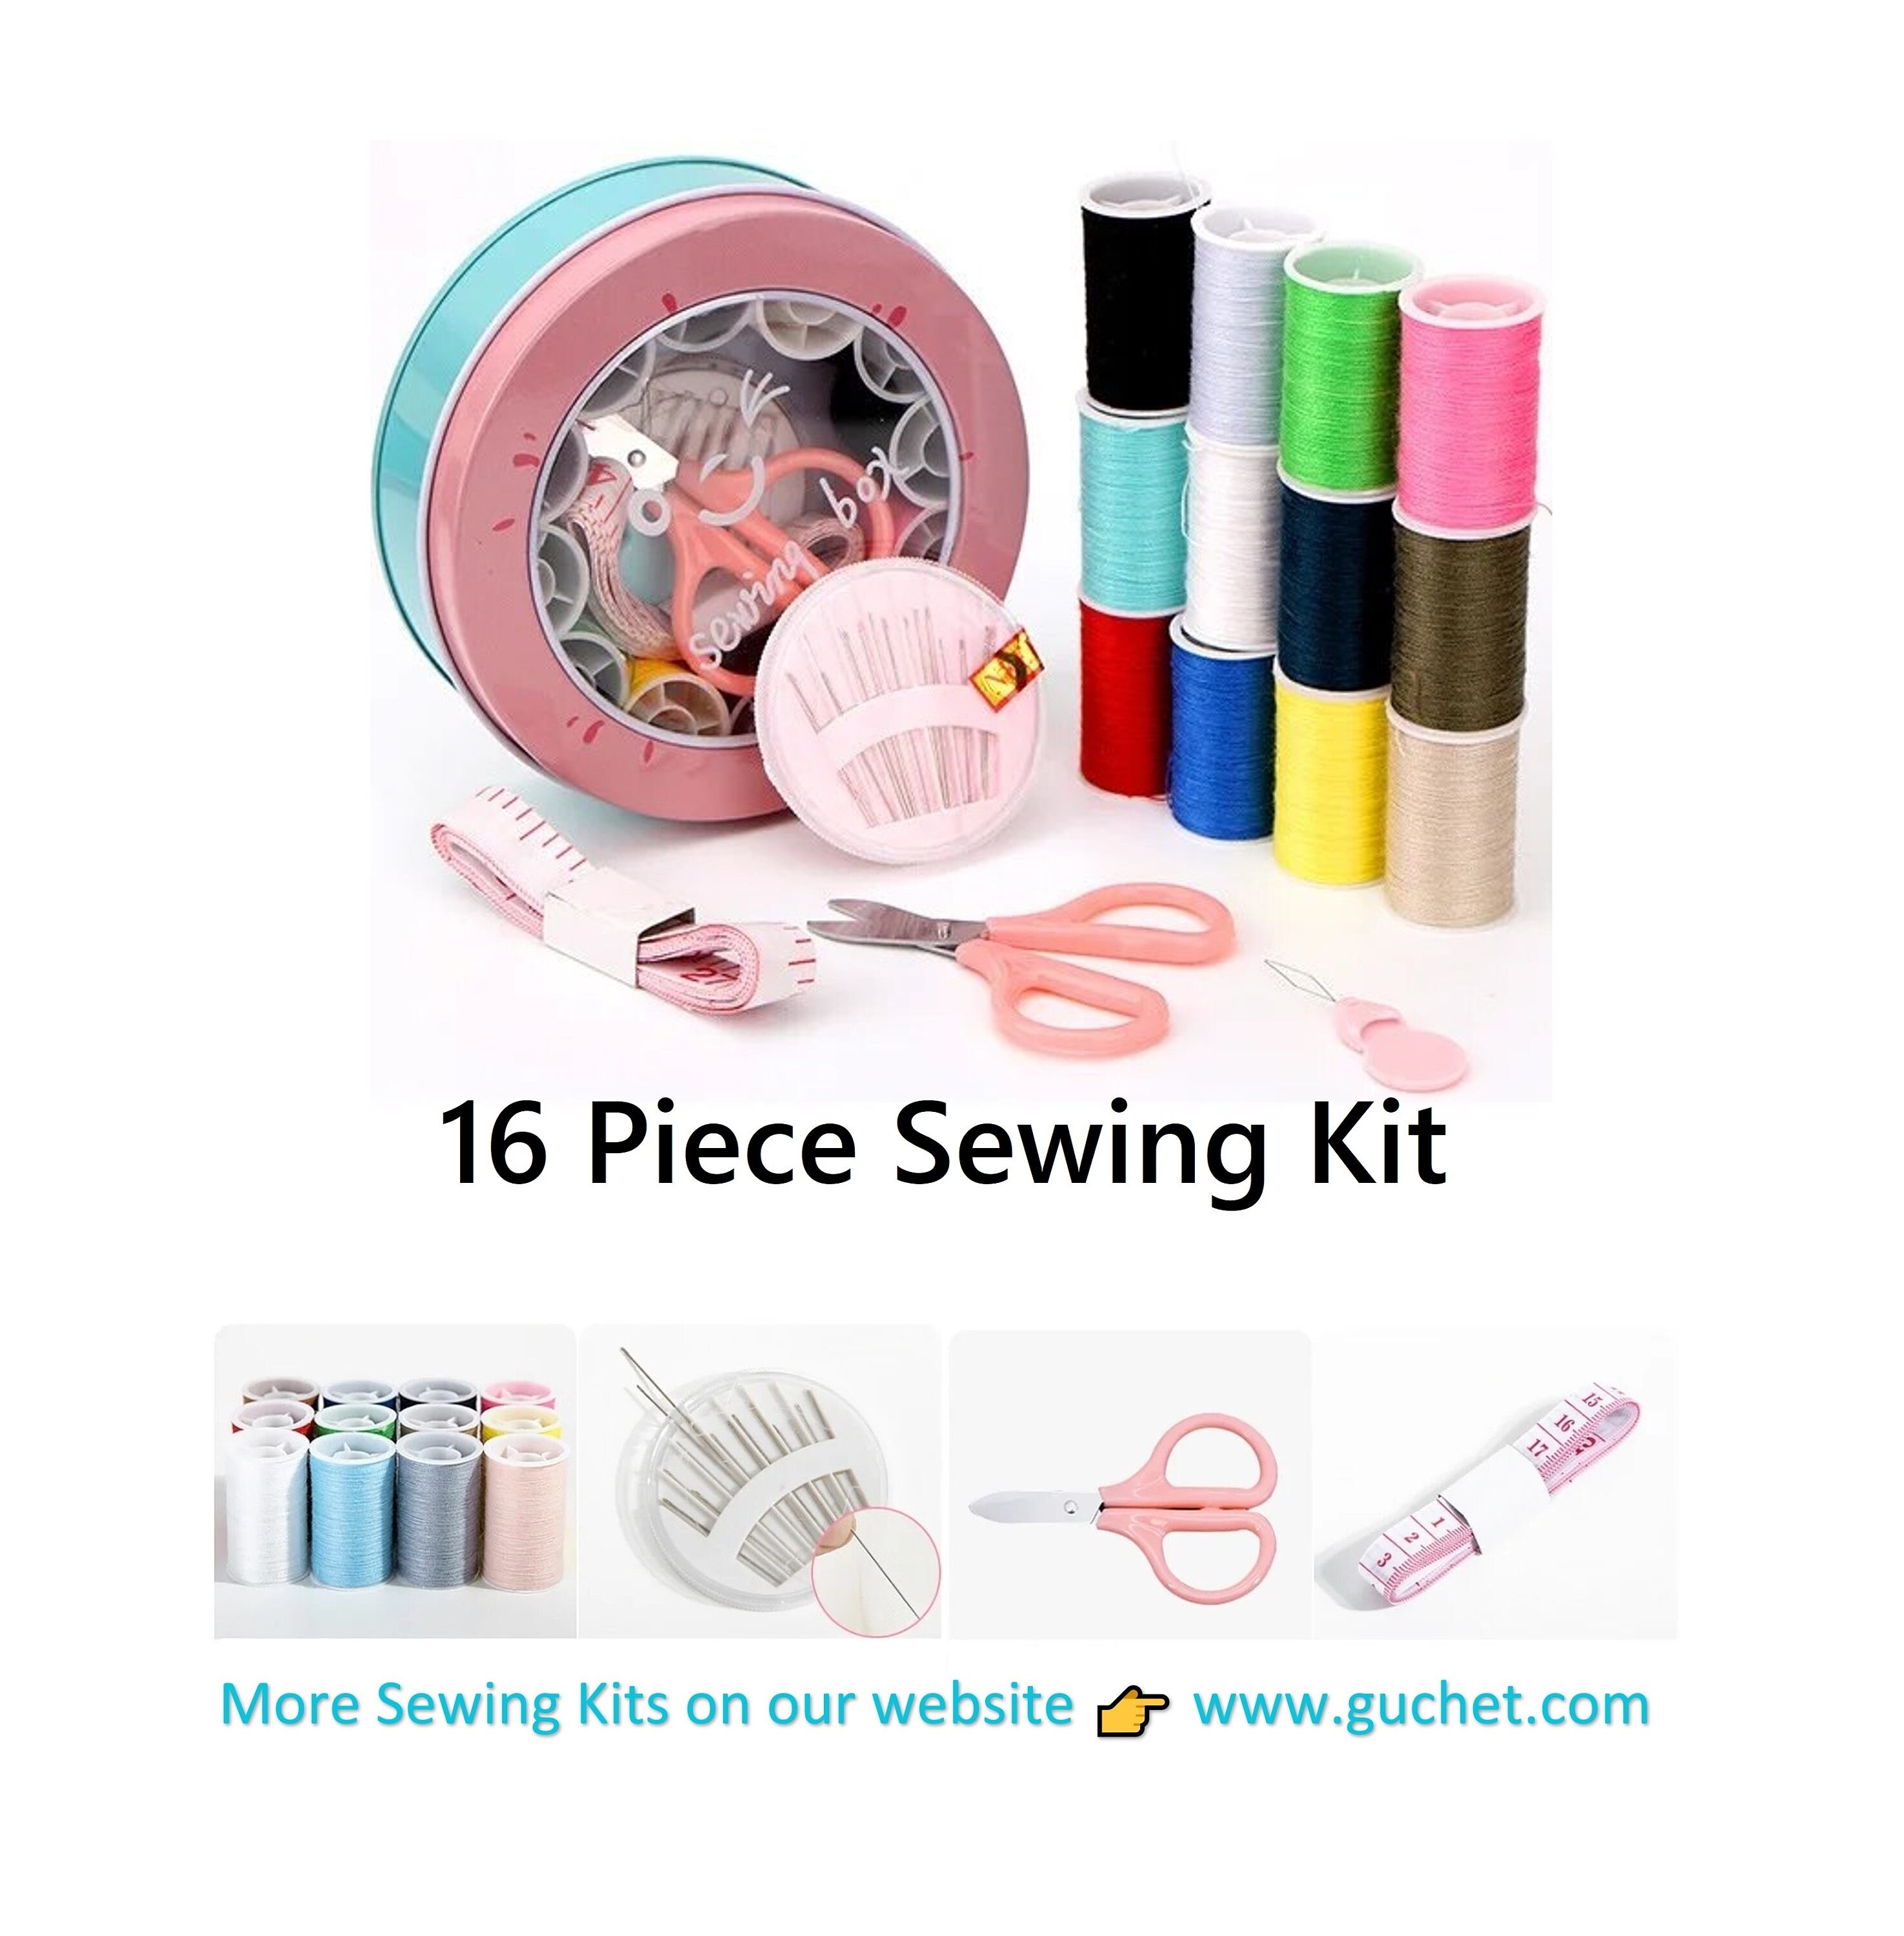 Sewing Kit for Adults, Kids, Beginner, Home, Traveler,Emergency, Portable  Sewing Supplies Contains Soft Tape Measure, Scissors, Thimble, Thread,  Sewing Needles Etc(Black, S)